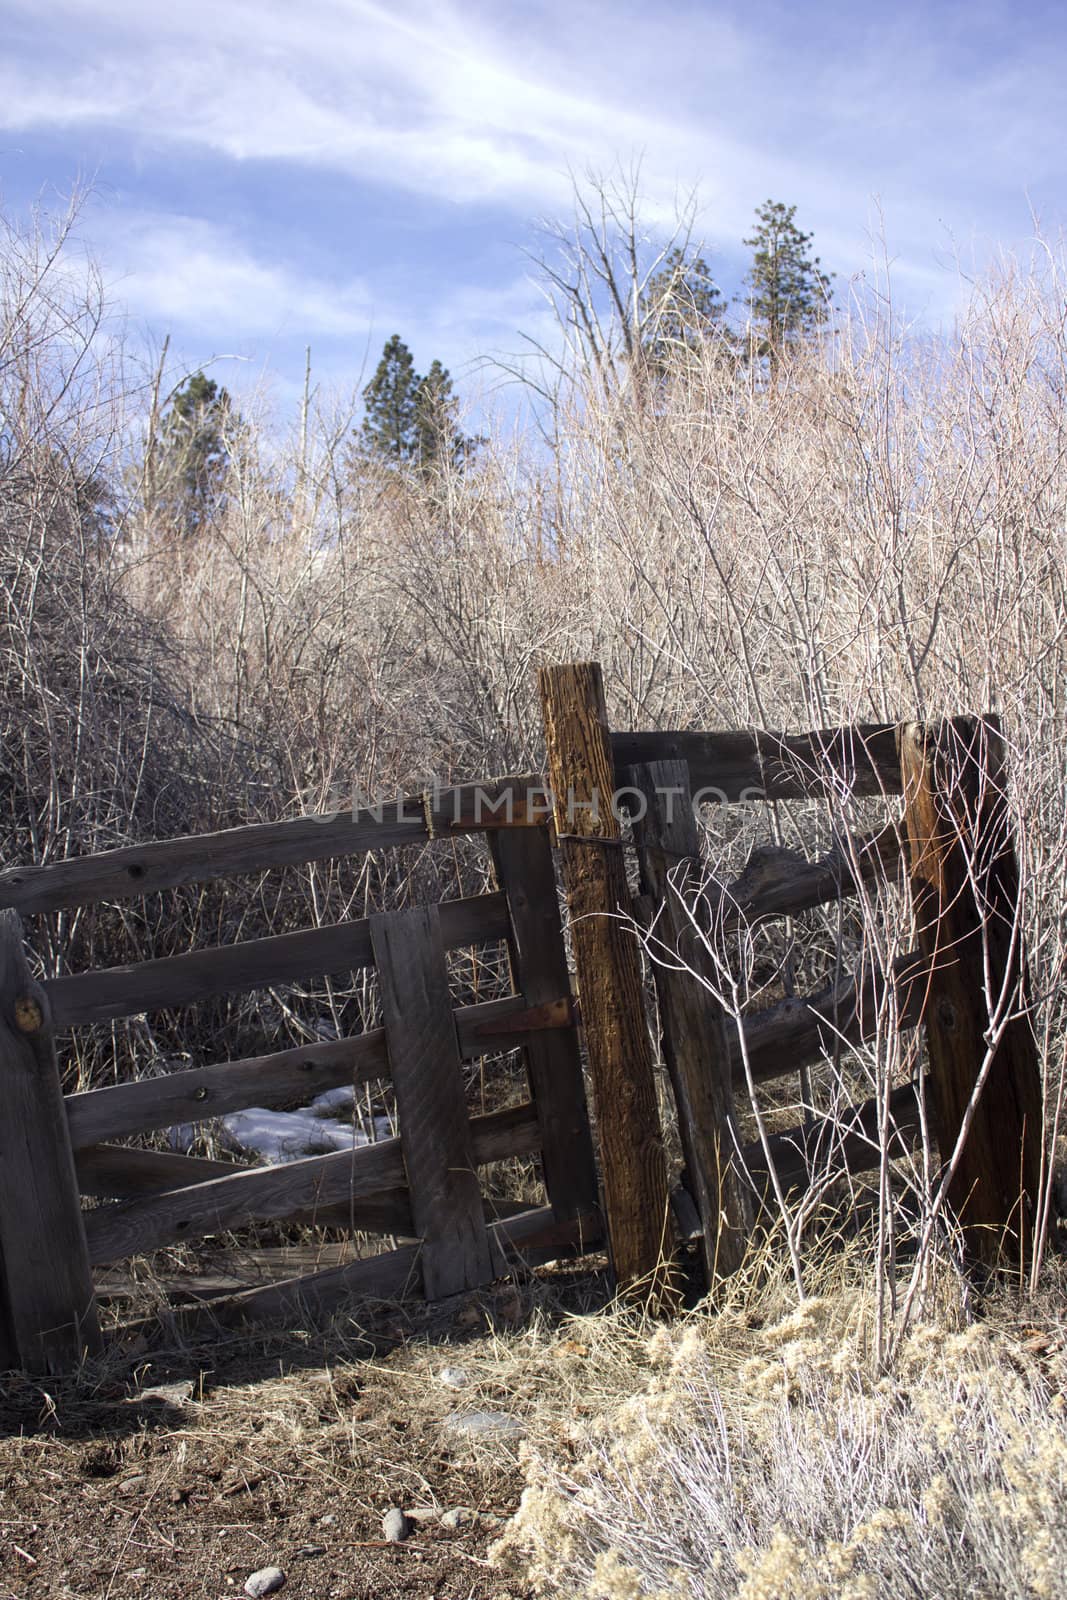 Old western ranch gate fence by jeremywhat